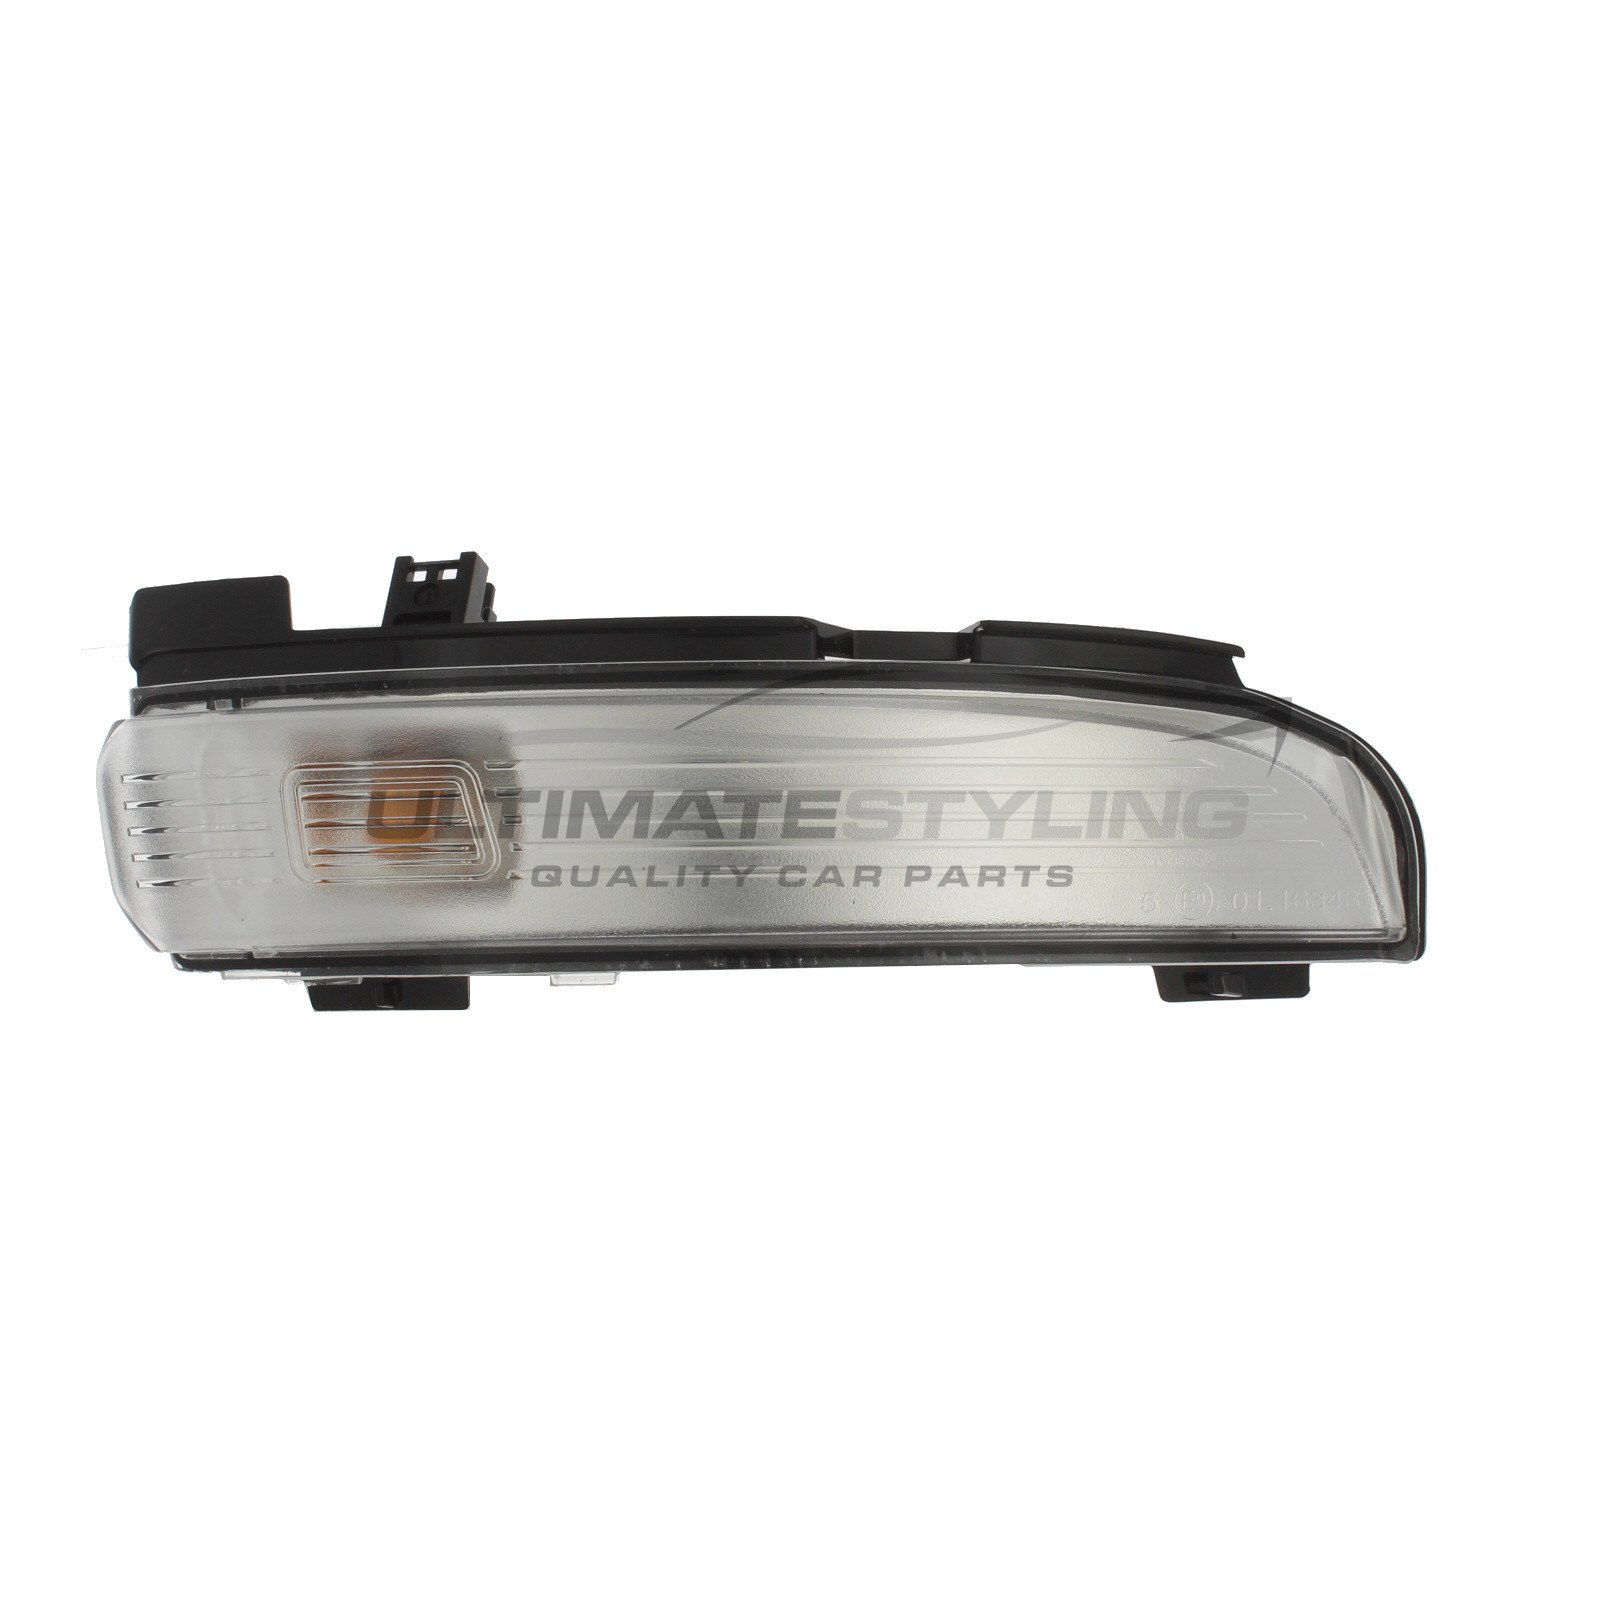 Mirror Indicator for Ford Galaxy